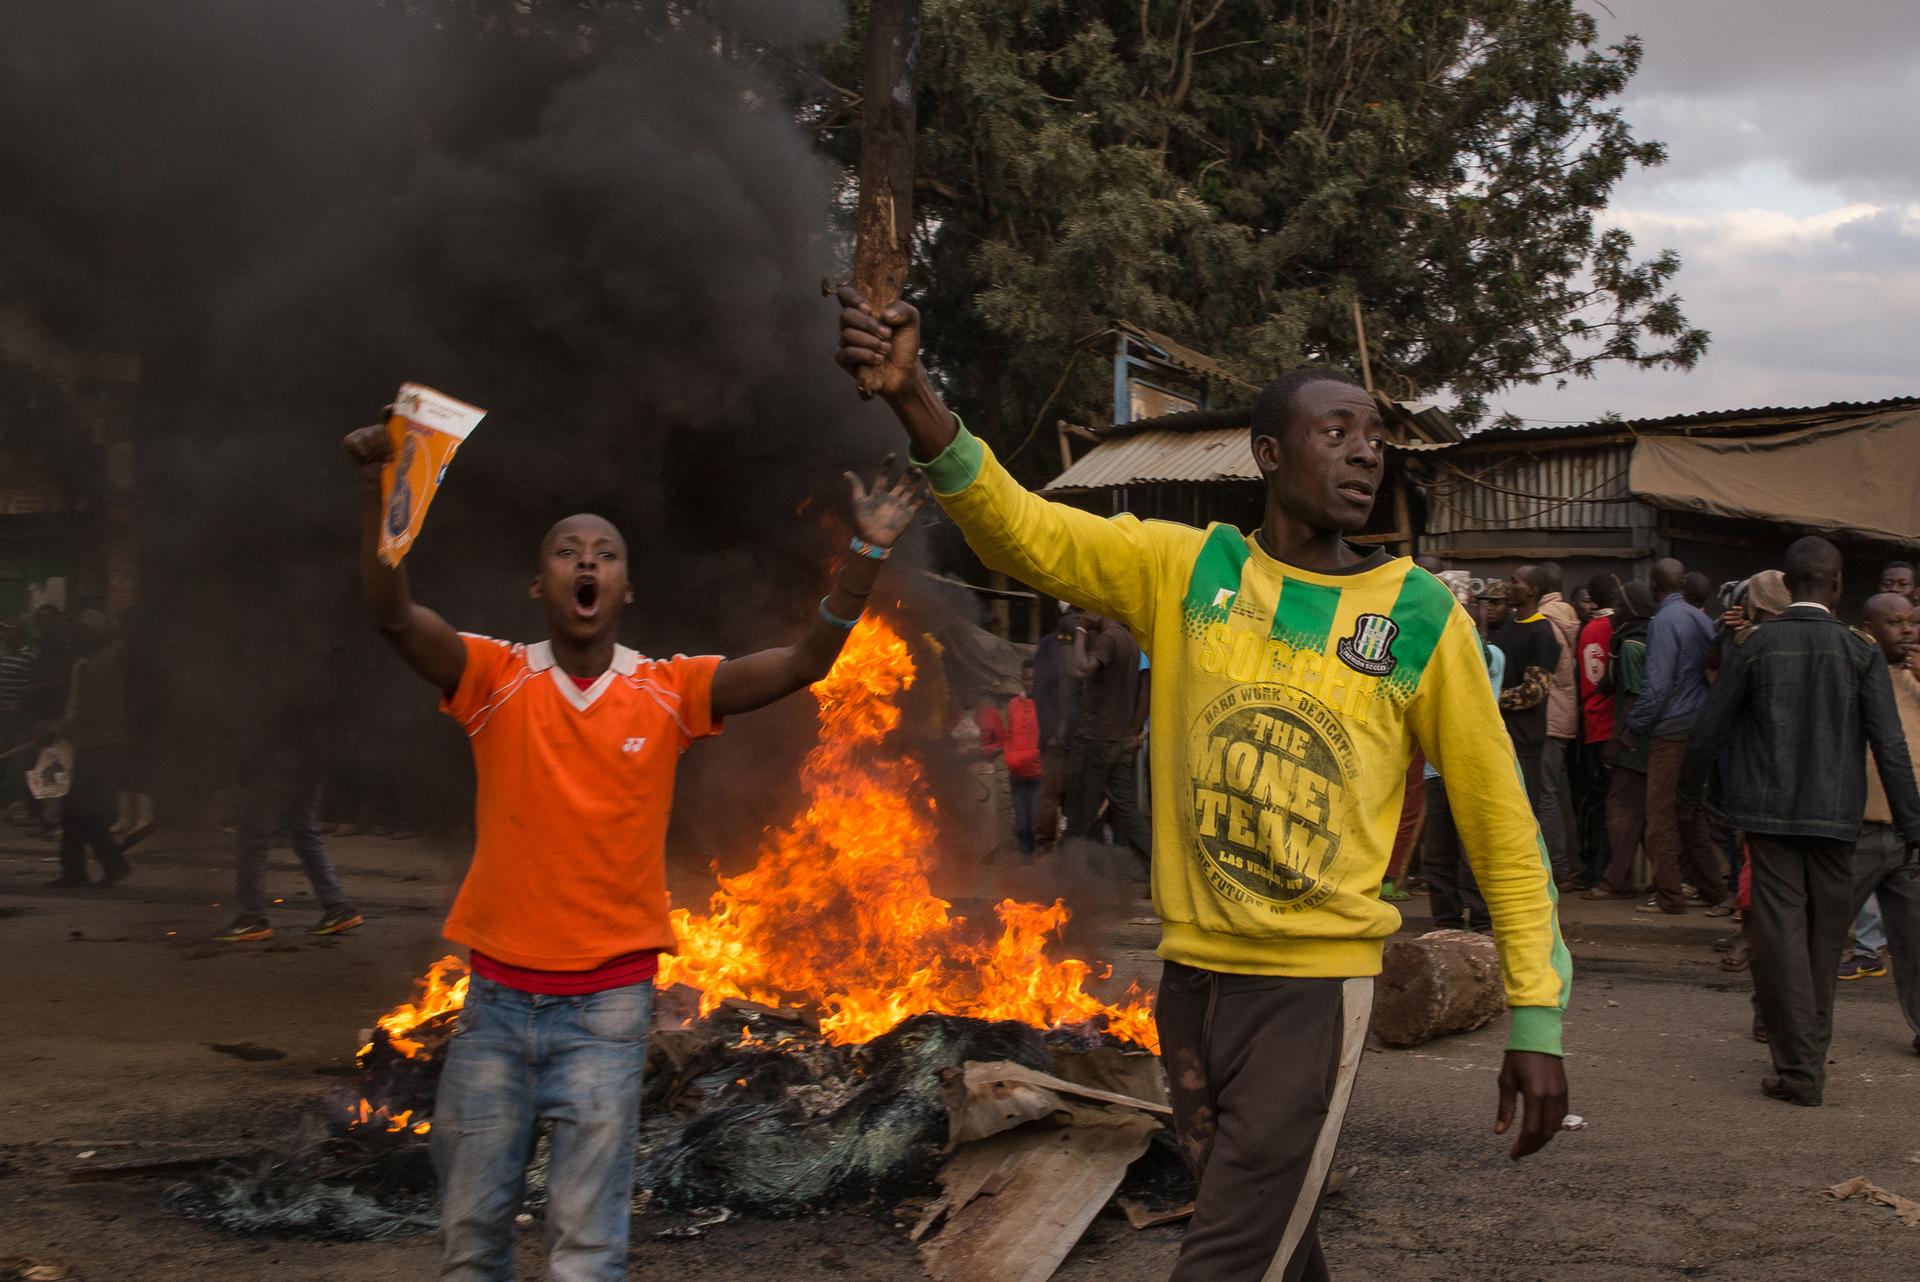 Men holding stones demand current President Uhuru Kenyatta step down from office. The demonstration came one day after Kenyans went to the polls to elect their next president.